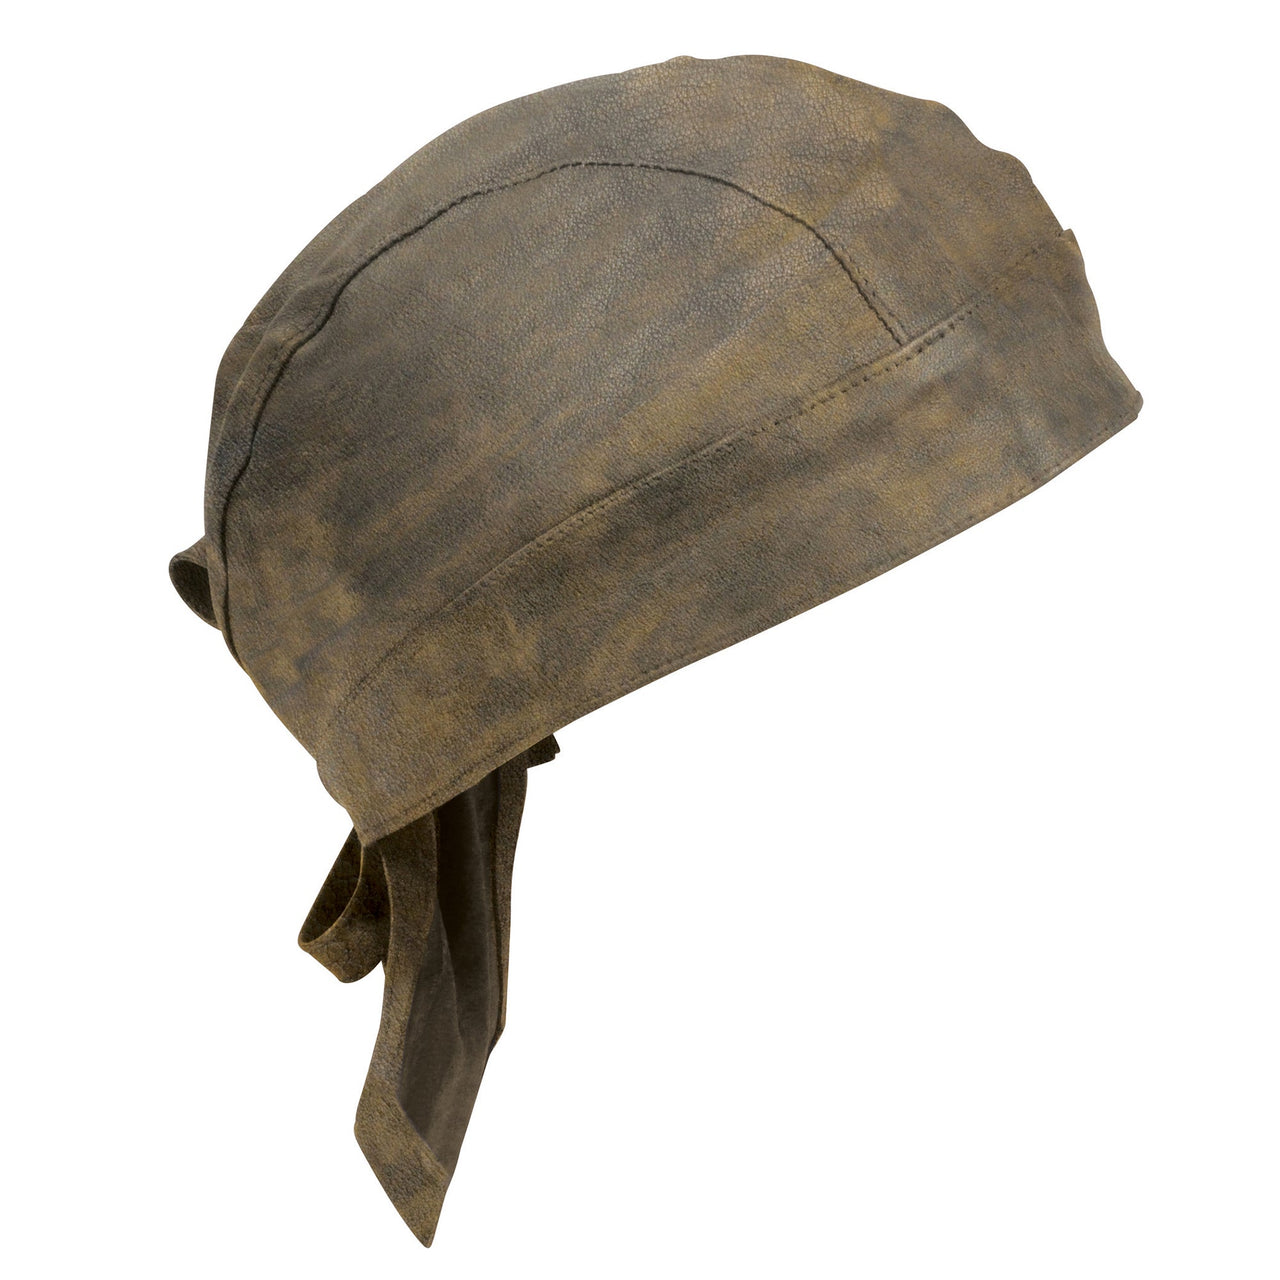 Distressed Brown Leather Skull Cap - HighwayLeather